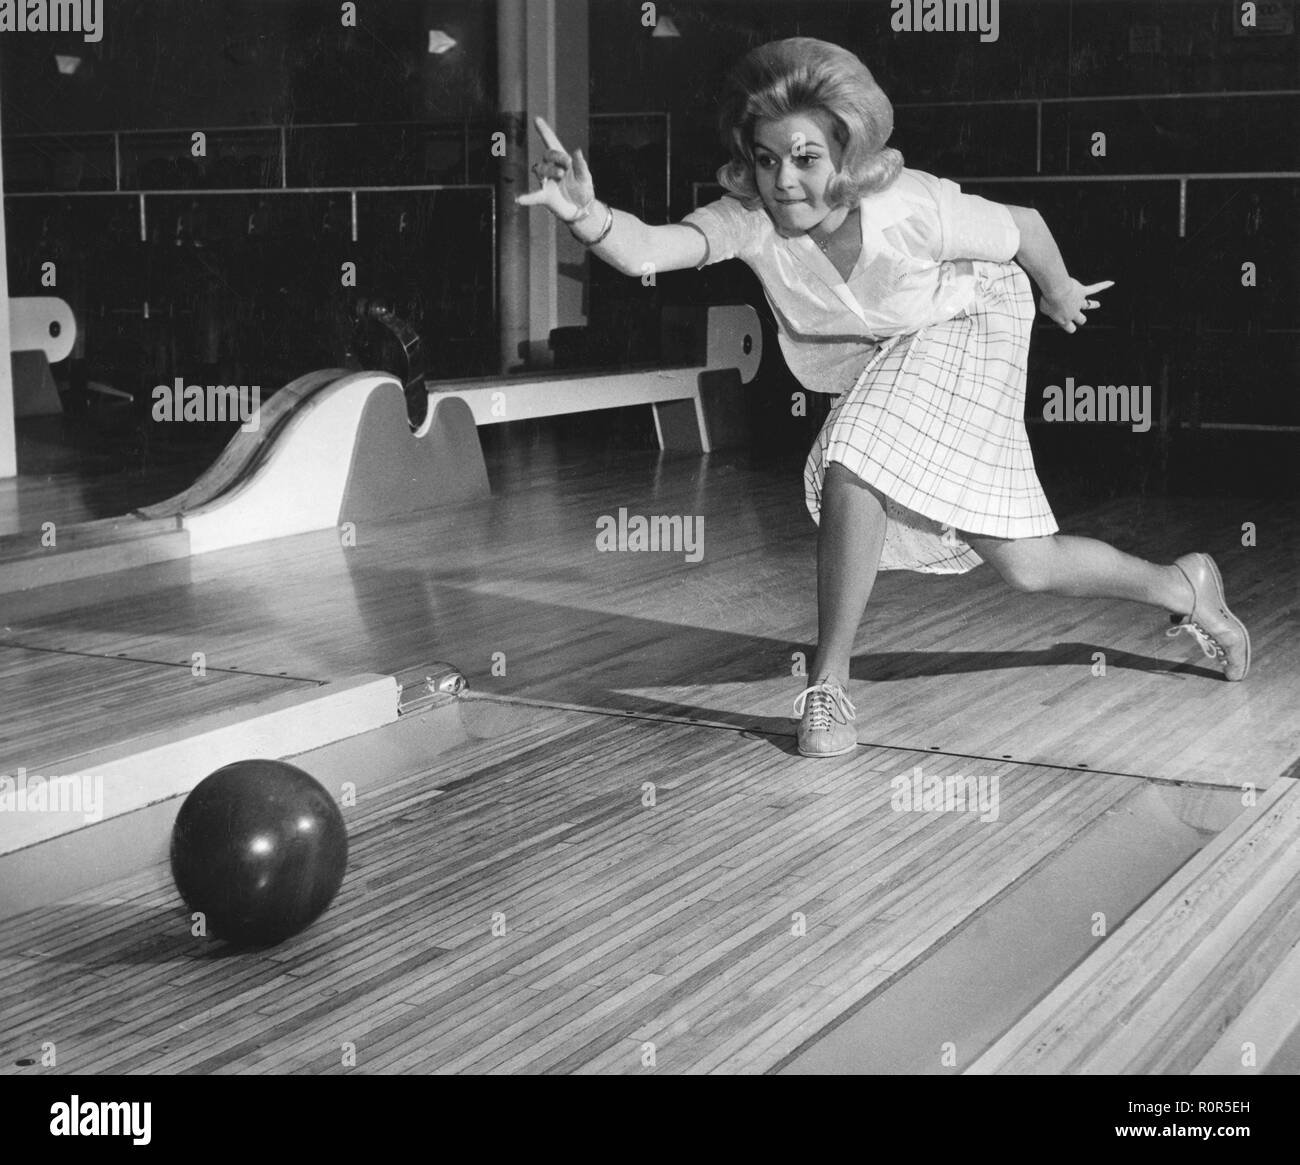 Bowling in the 1960s. Newly elected Stockholm Lucia Inga-Lill Jungnelius is bowling 1963 Stock Photo